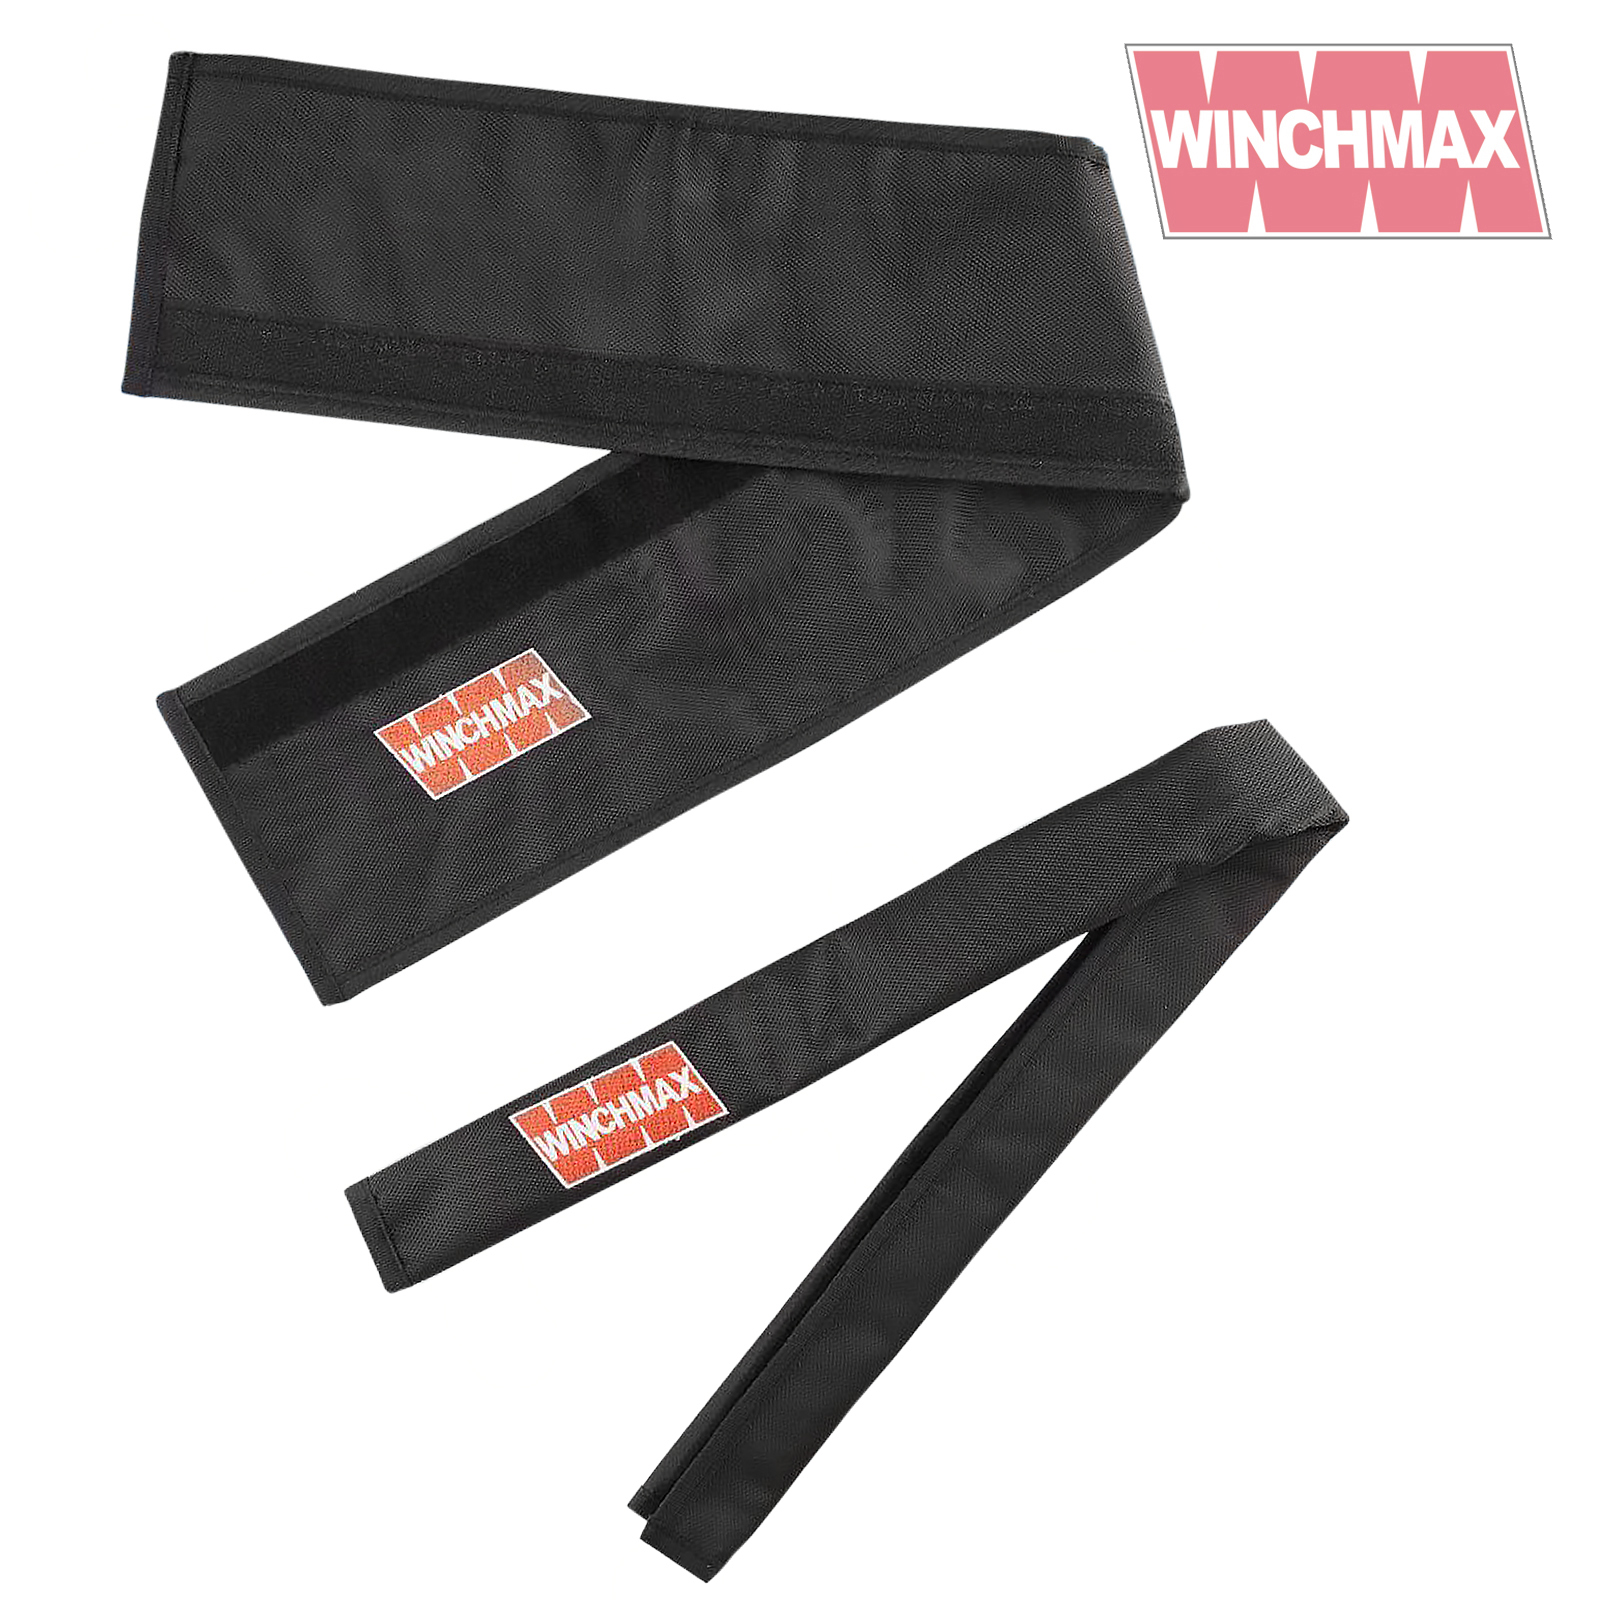 WINCHMAX Protective Winch Rope Sleeve